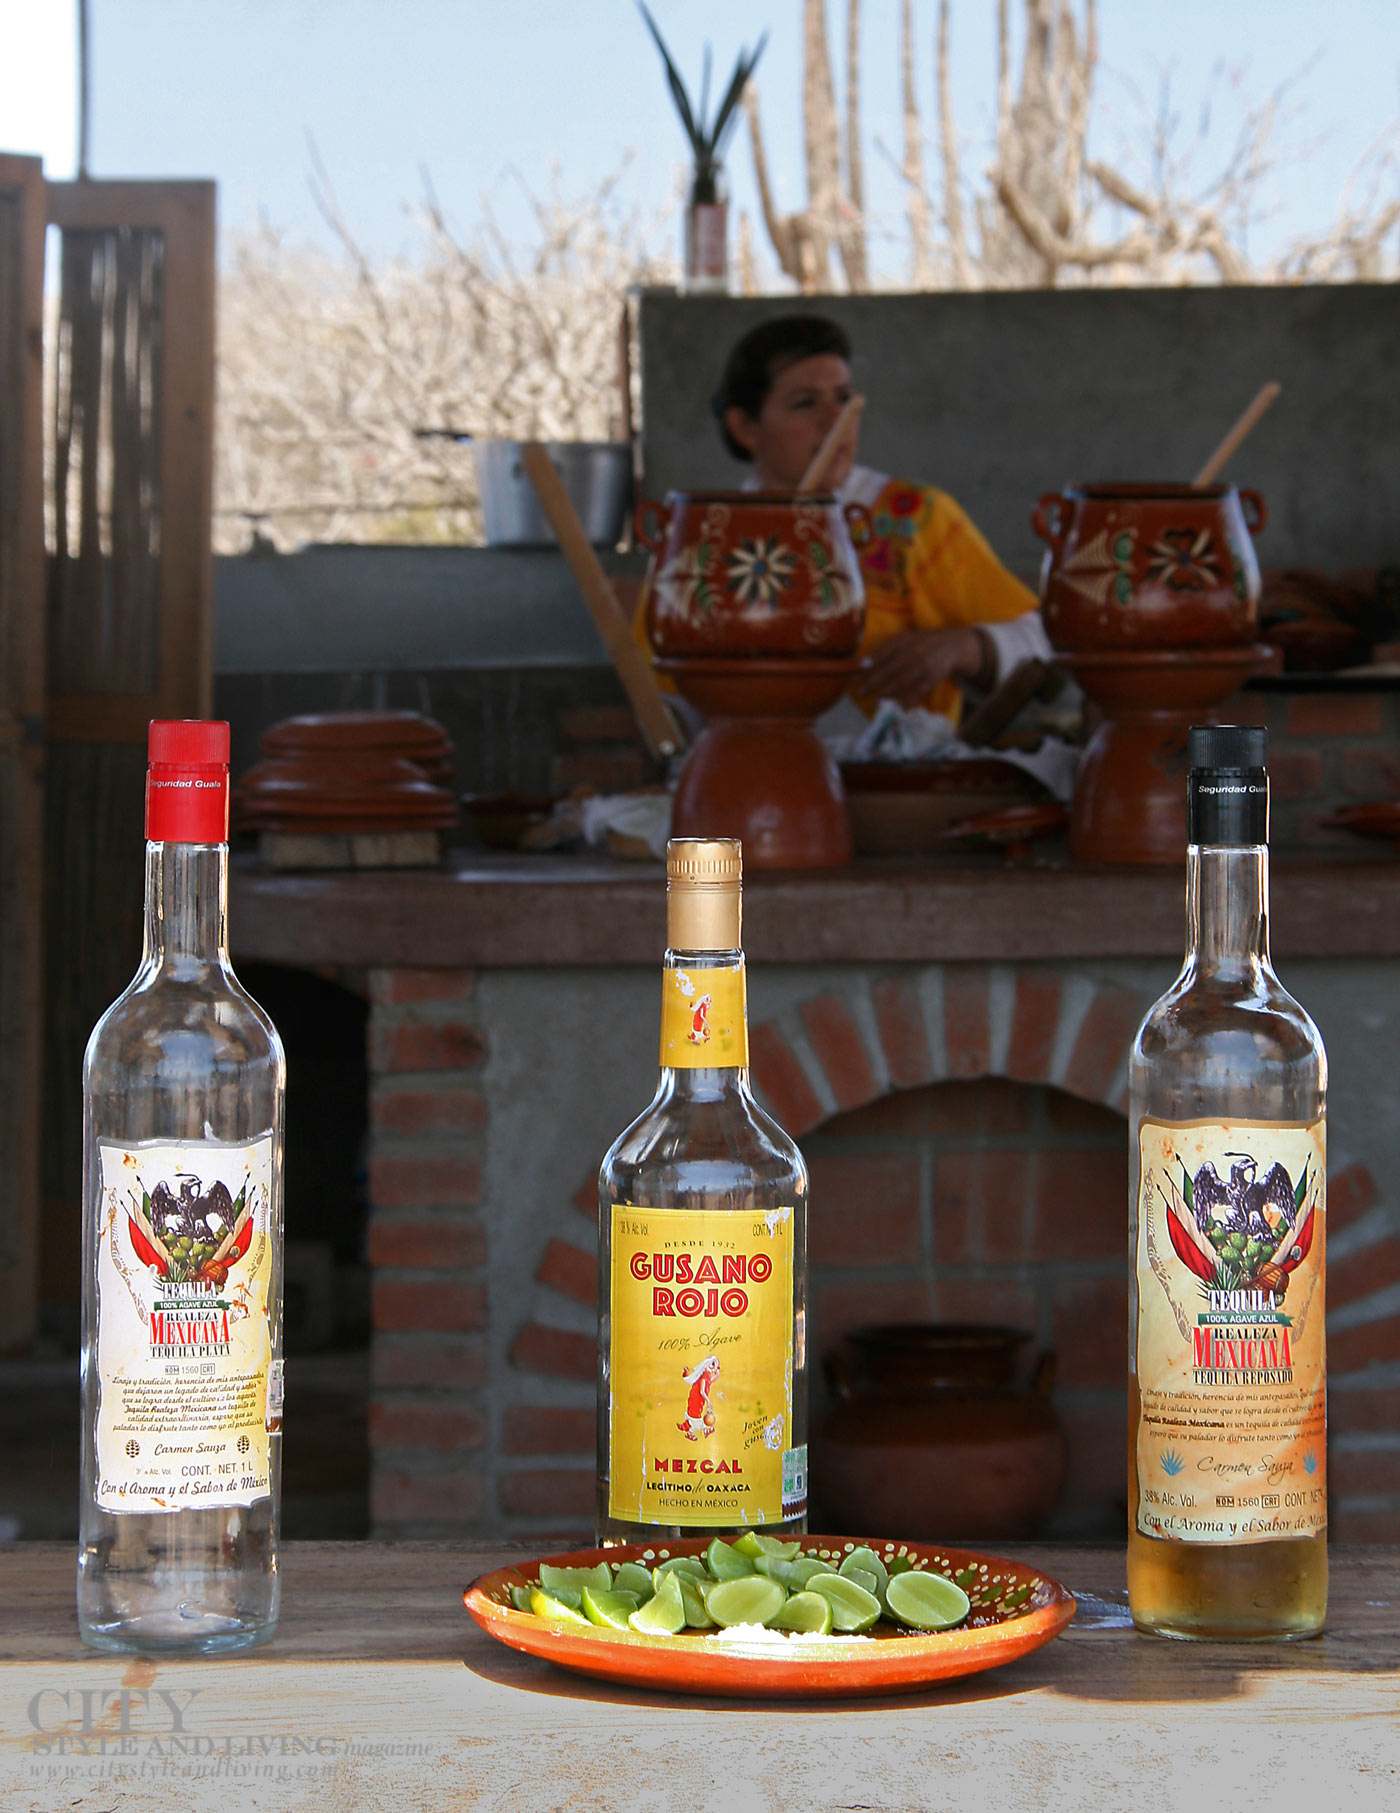  City Style and Living Magazine wine and spirits mezcal versus tequila Tequilas